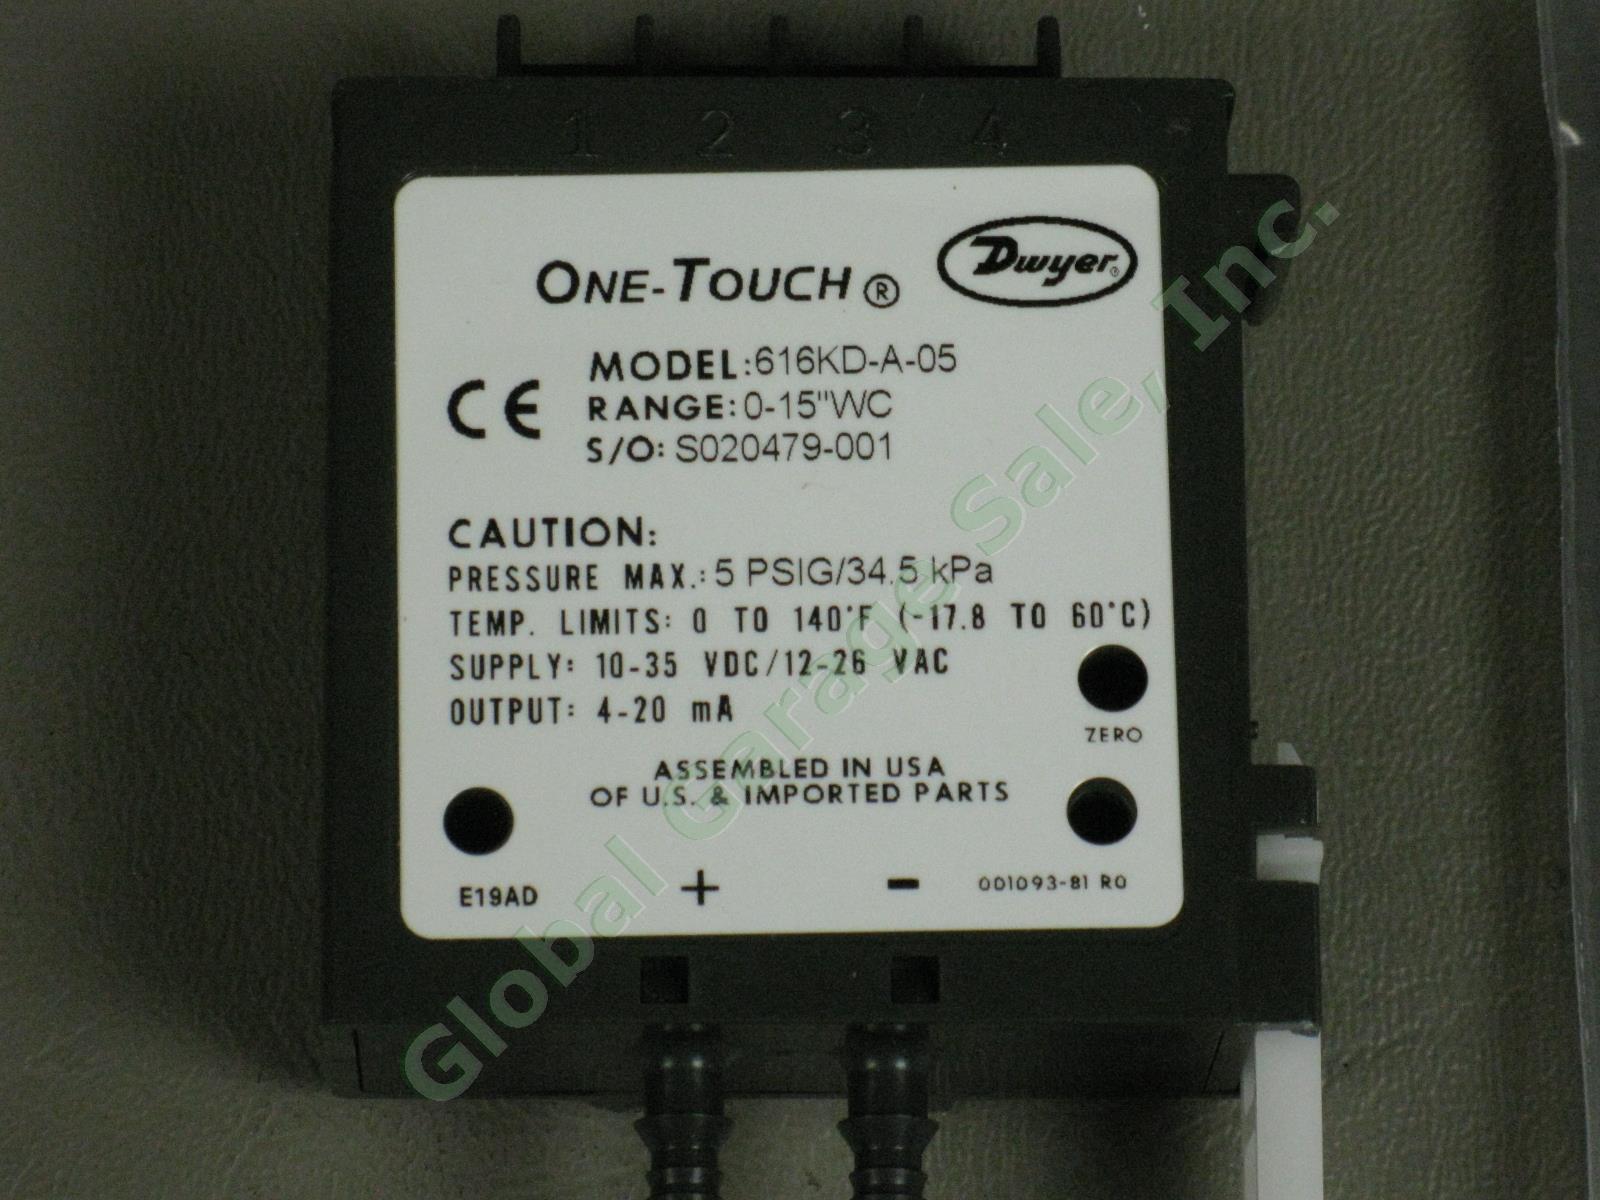 6 Dwyer One-Touch Series 616KD-A-05 Differential Pressure Transmitter Sealed NIB 1